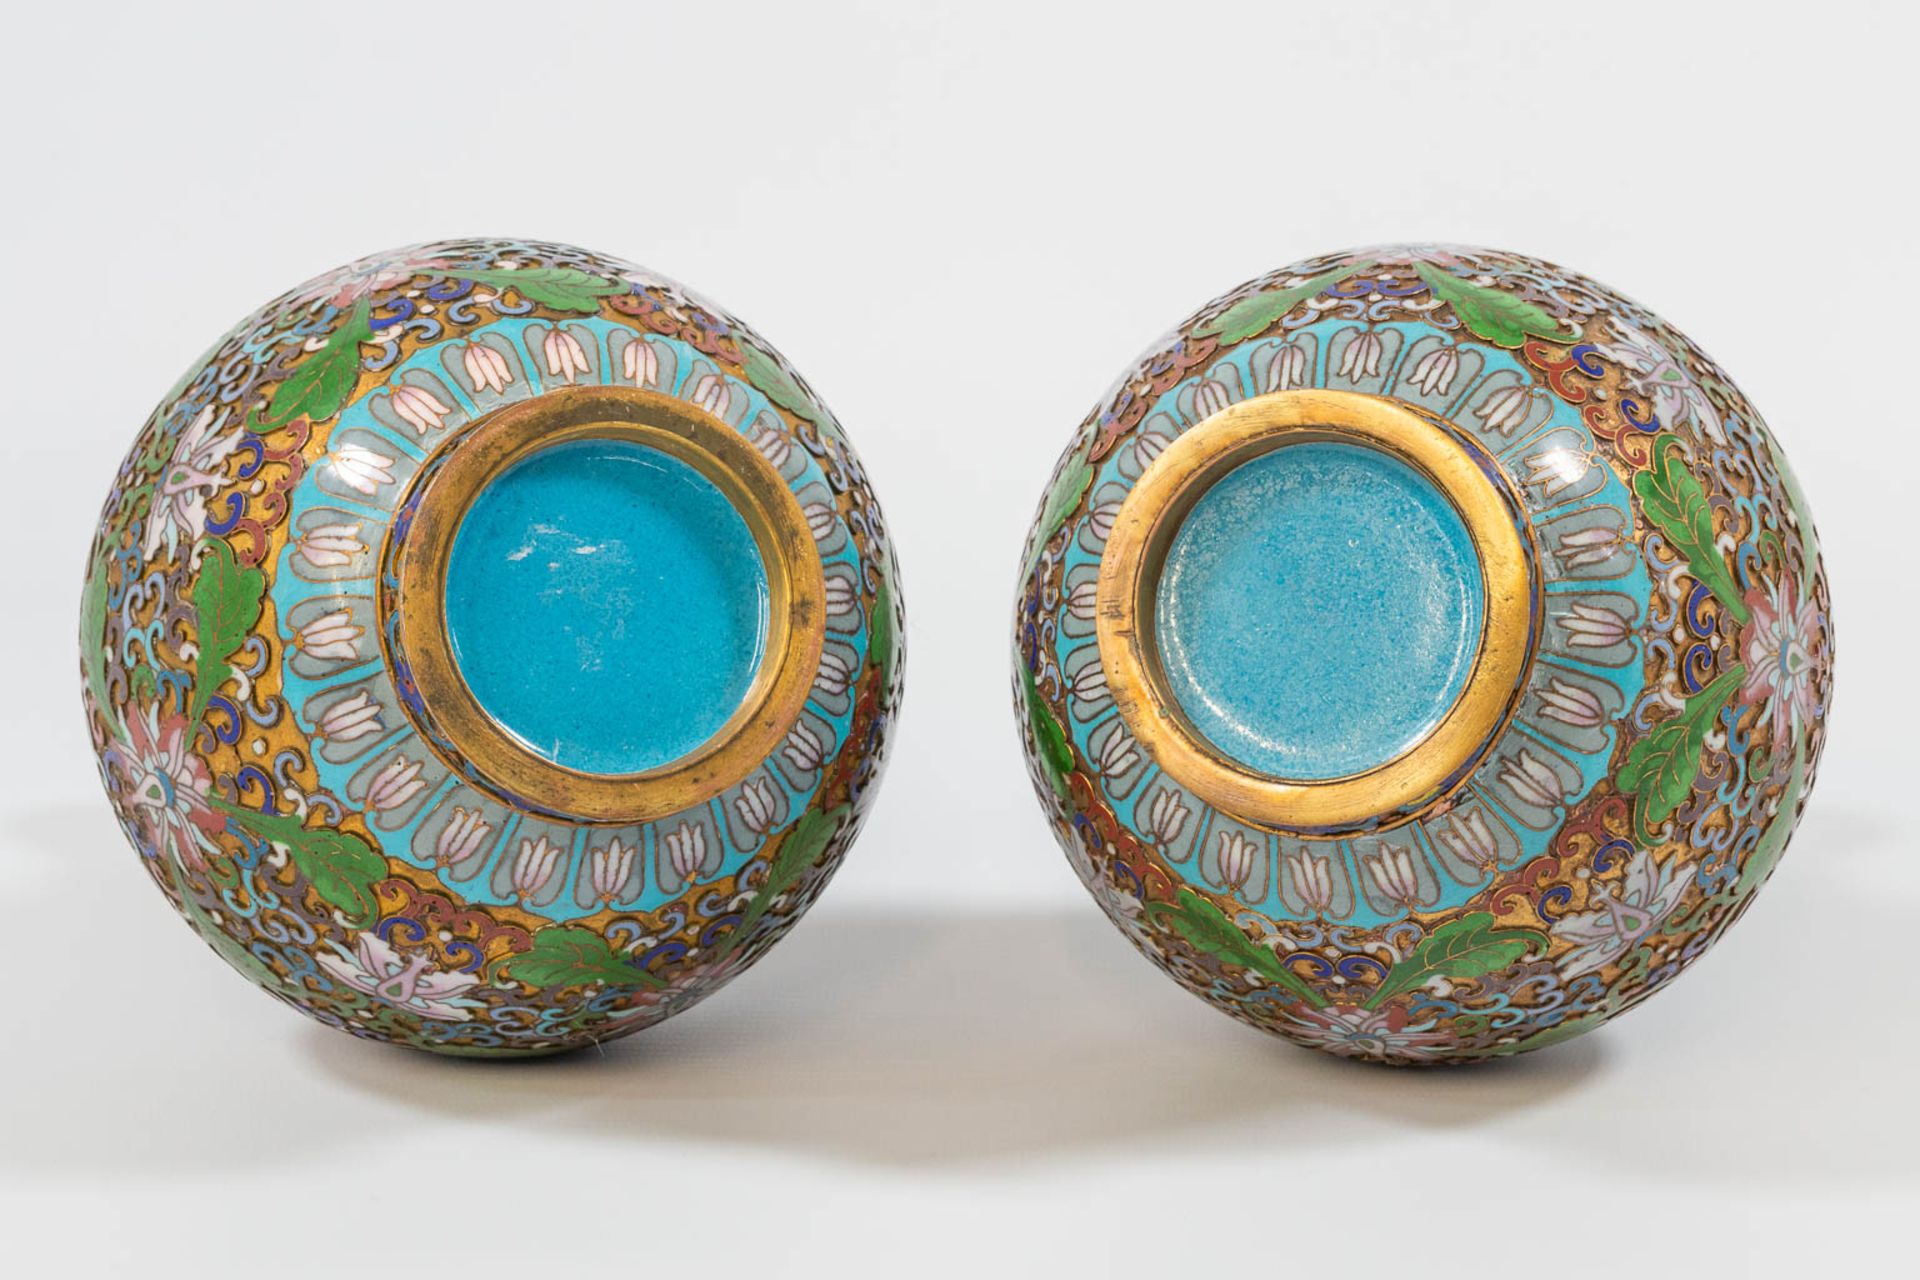 A pair of openworked Cloisonné vases, made of Bronze and enamel. - Image 10 of 17